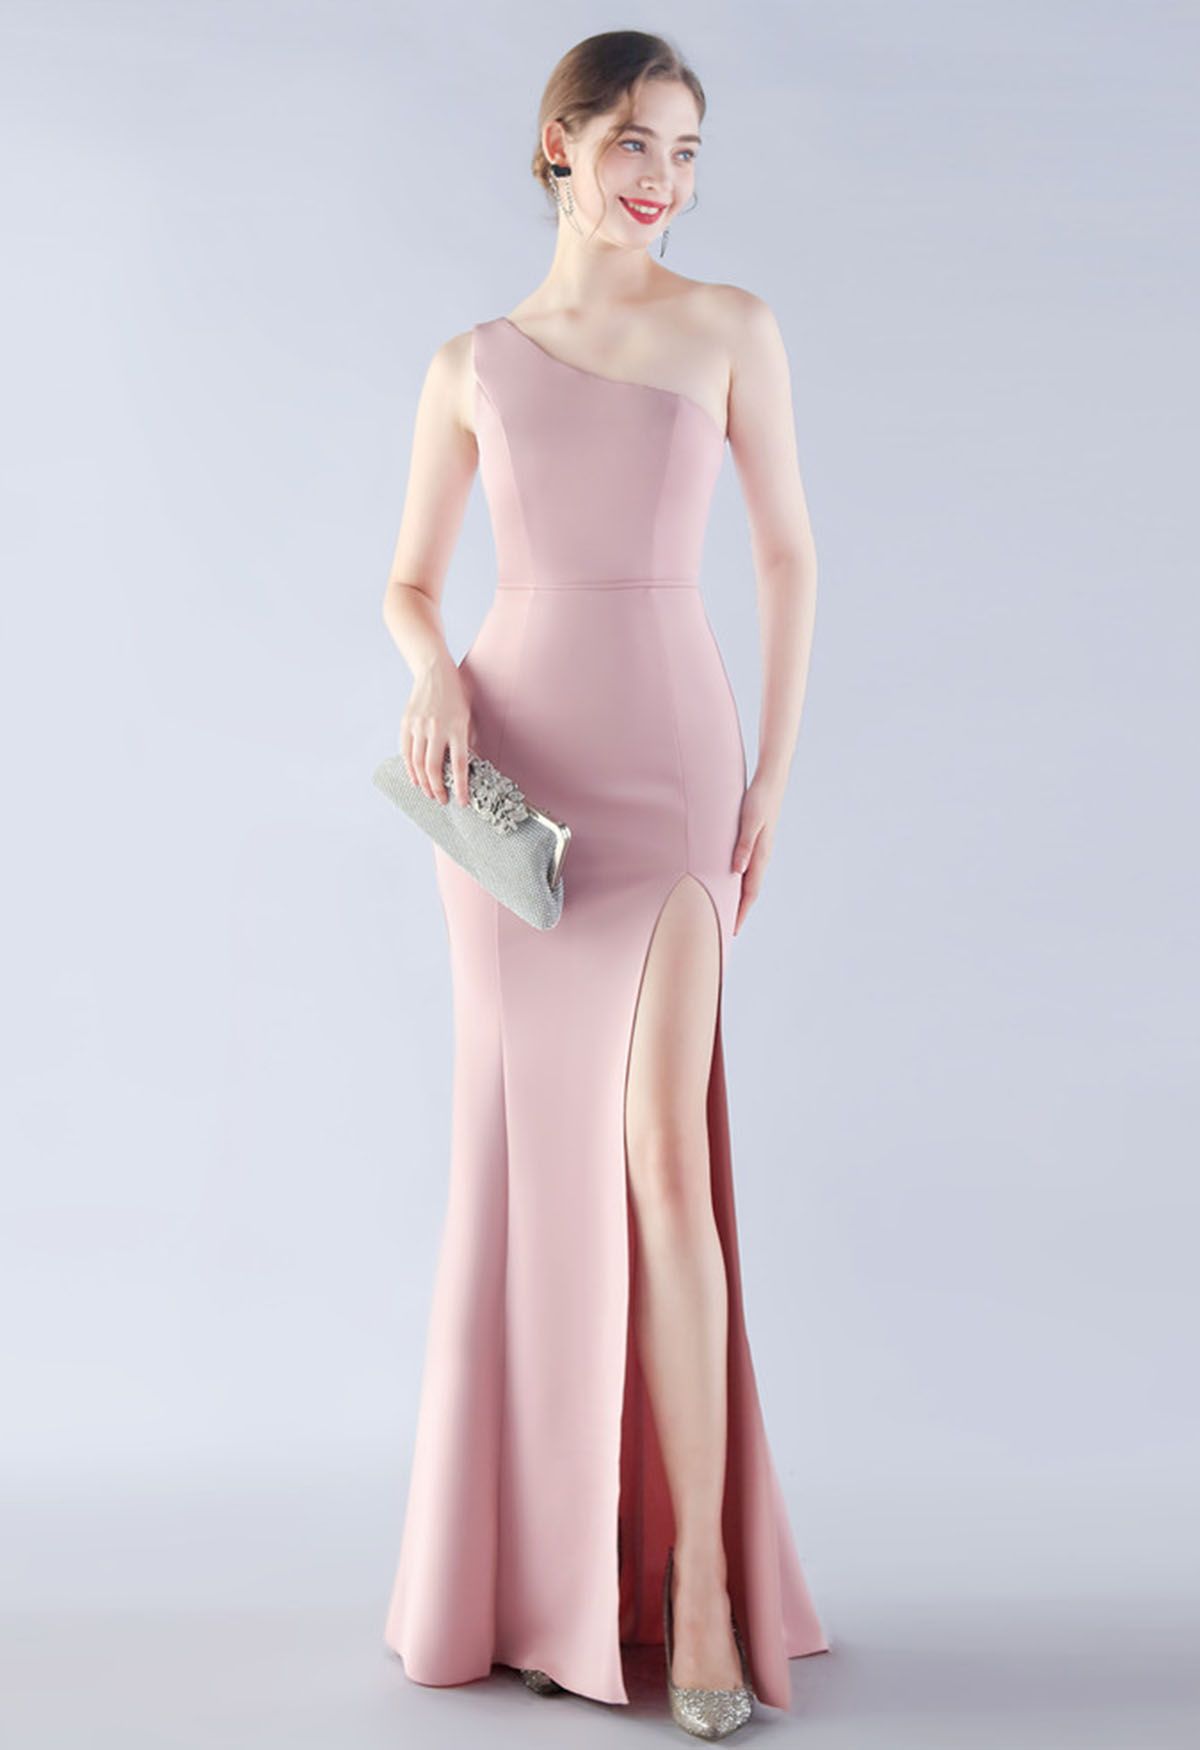 Satin Finished One-Shoulder Slit Mermaid Gown in Pink